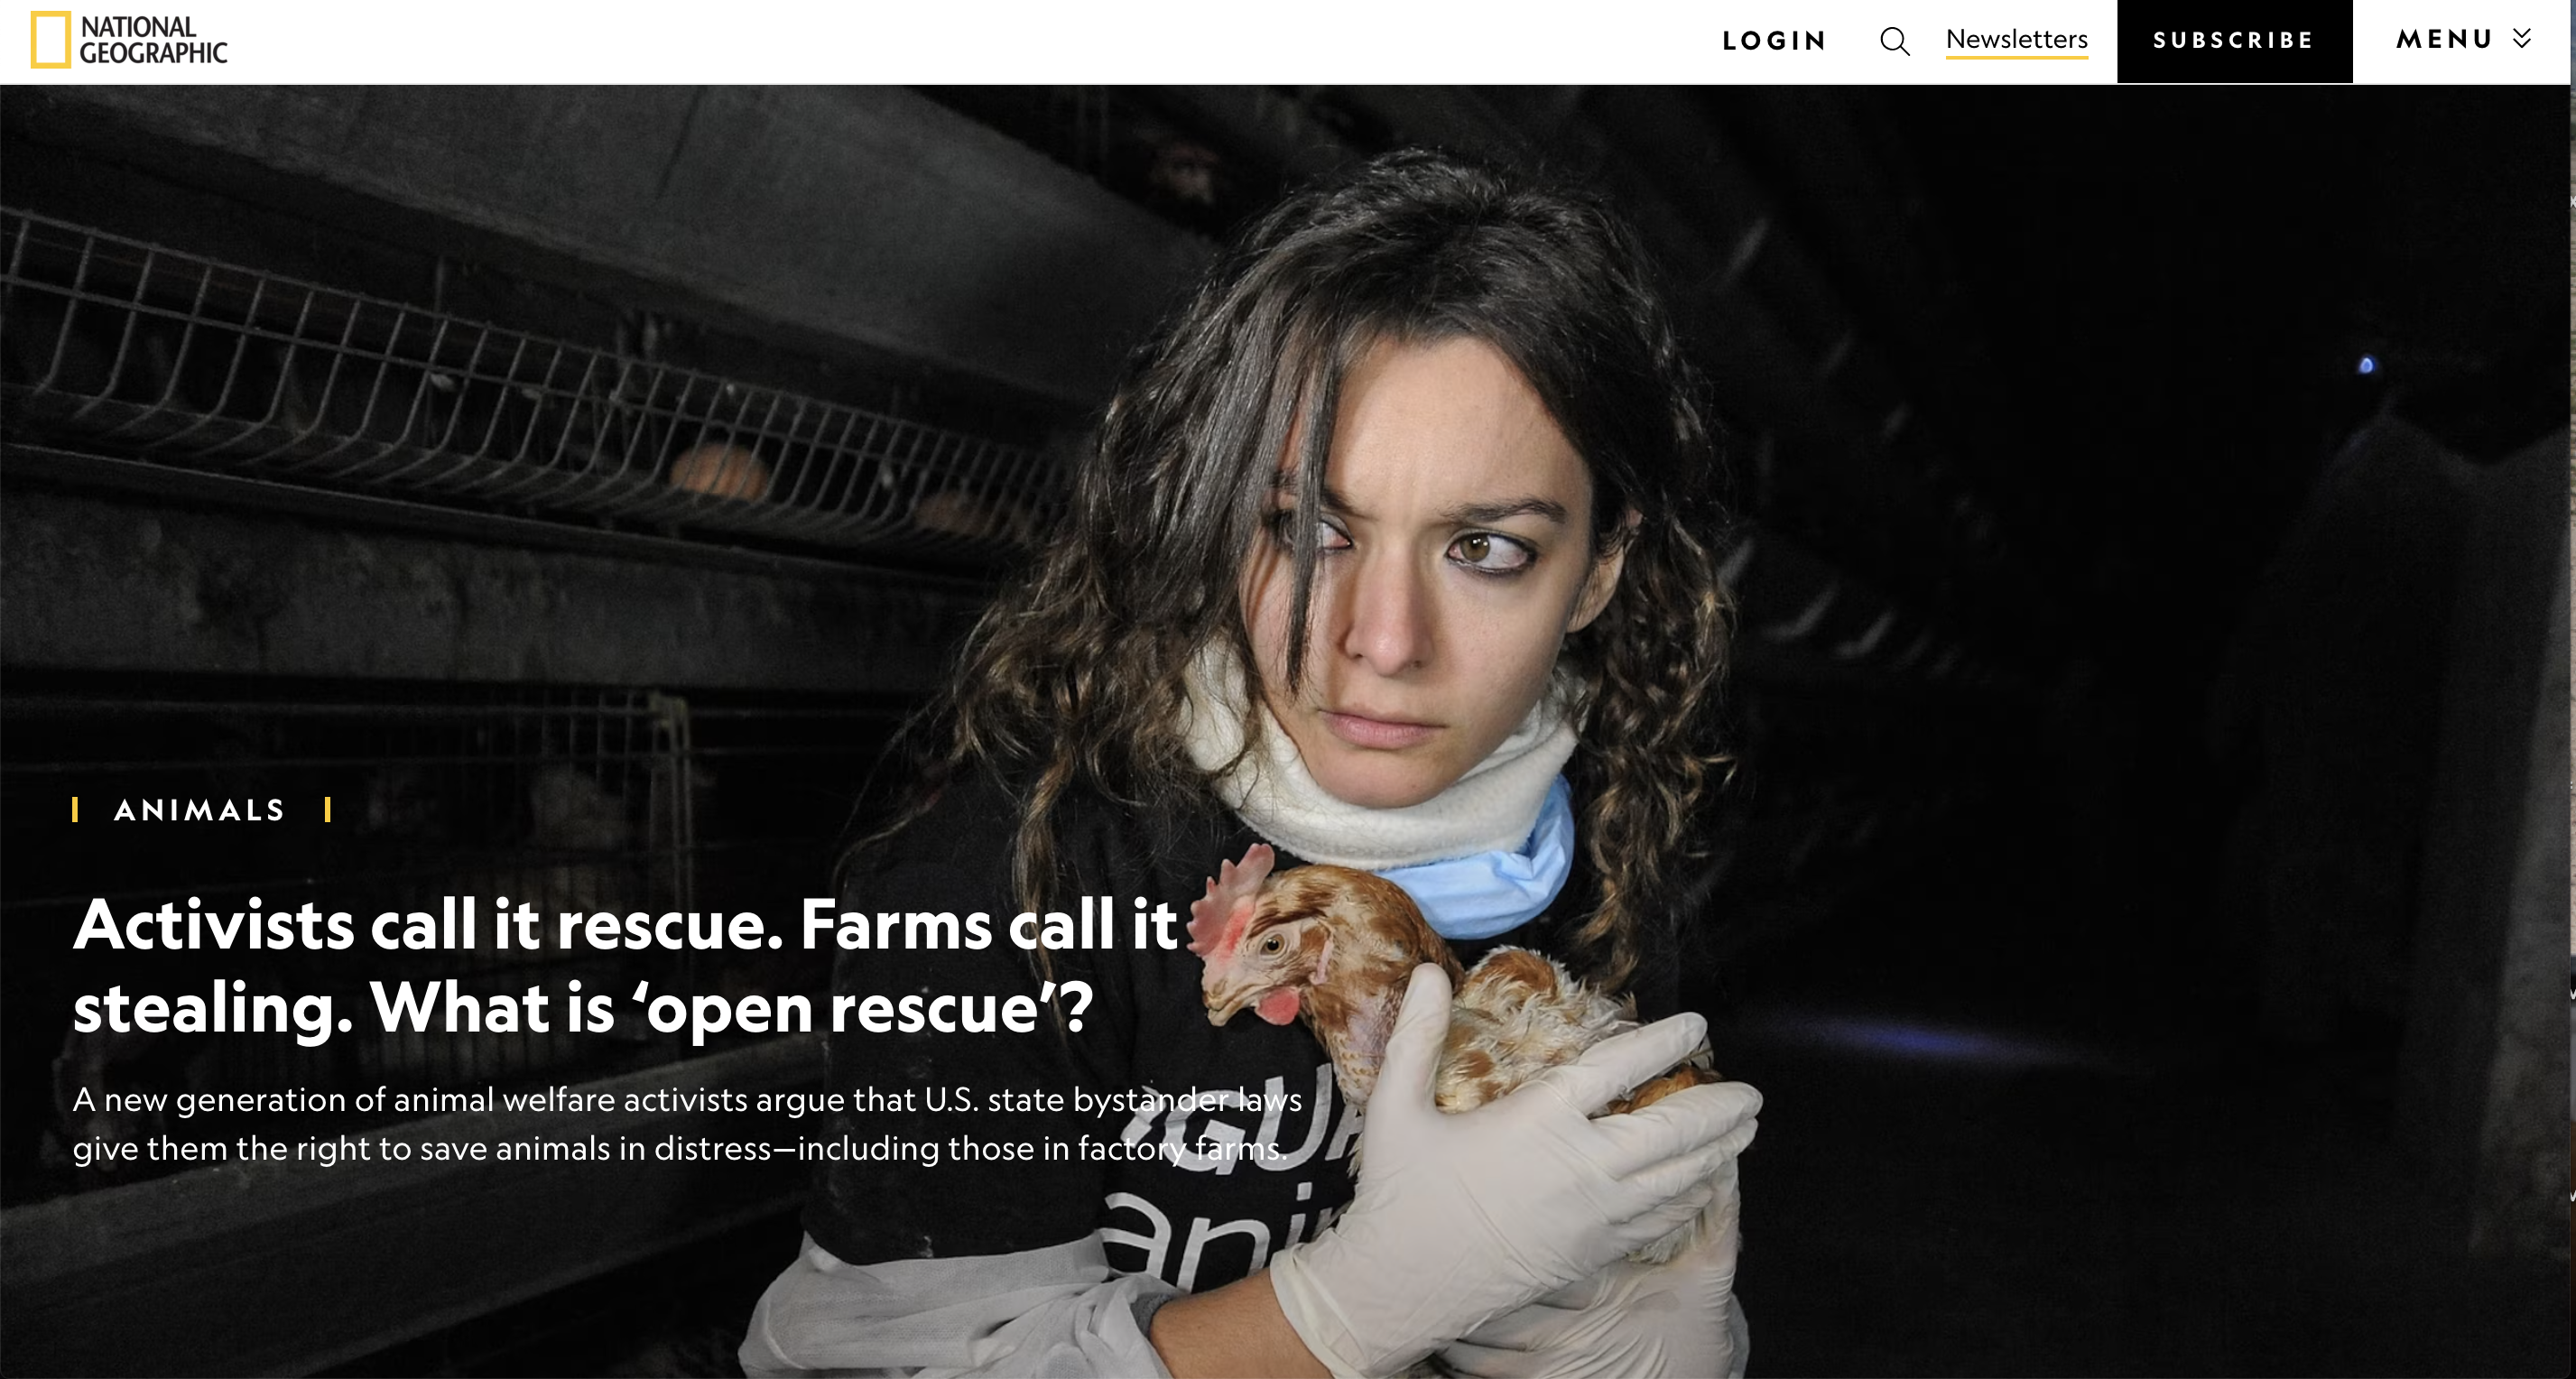 National Geographic - What is ‘open rescue’? -   